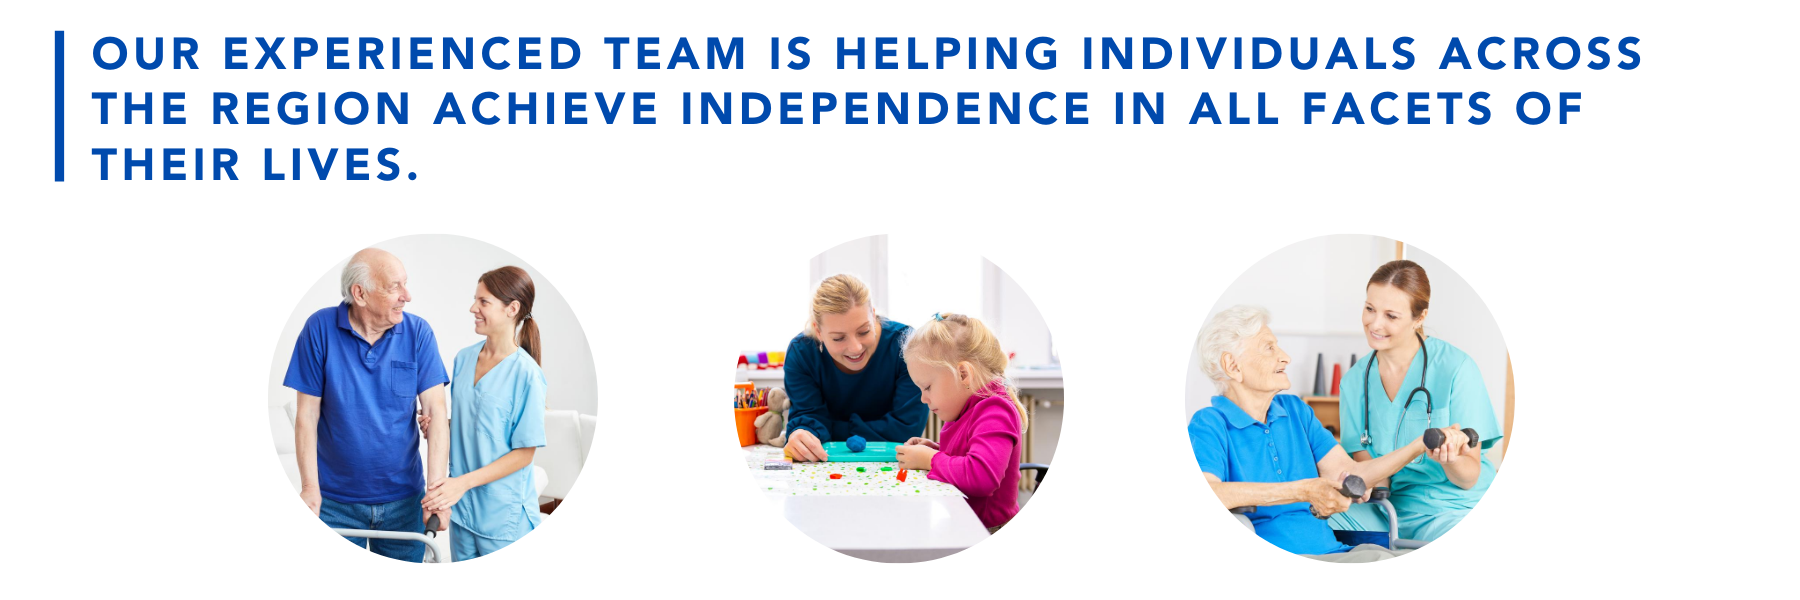 Our experienced team is helping individuals across the region achieve independence in all facets of their lives.